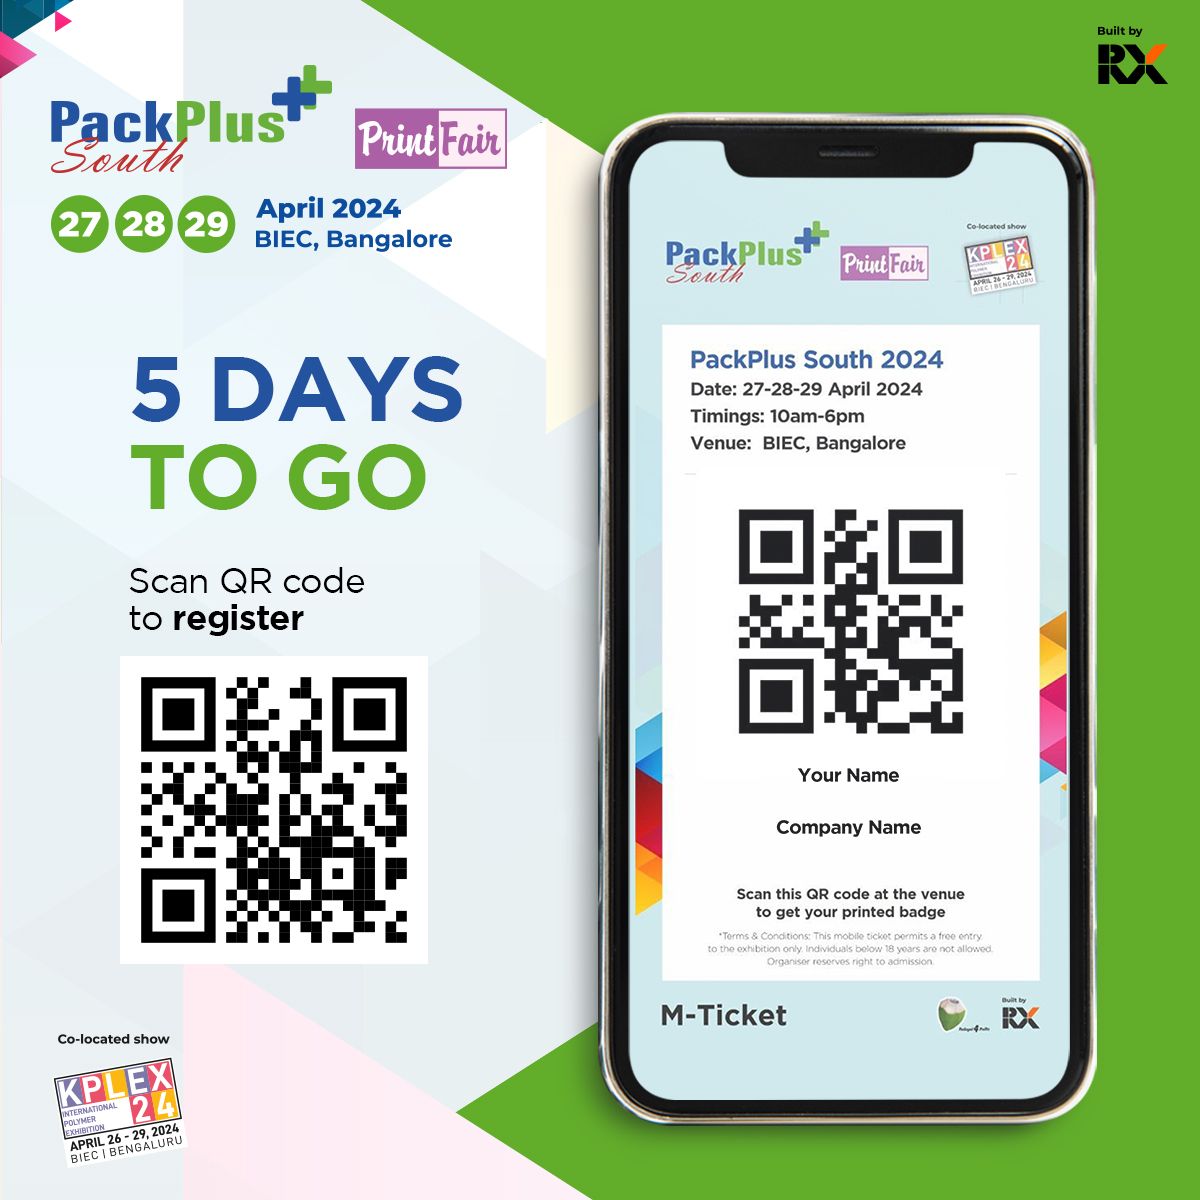 Mark your calendars! PackPlus South is 5 days away

See the latest trends and innovations in the packaging and printing industry

Free visitor registration: cutt.ly/zw0Z4OIn

#Paperpackaging #FMCG #Foodpackaging #Food #Beverage #Exhibition #Manufacturing

@RXGlobal_